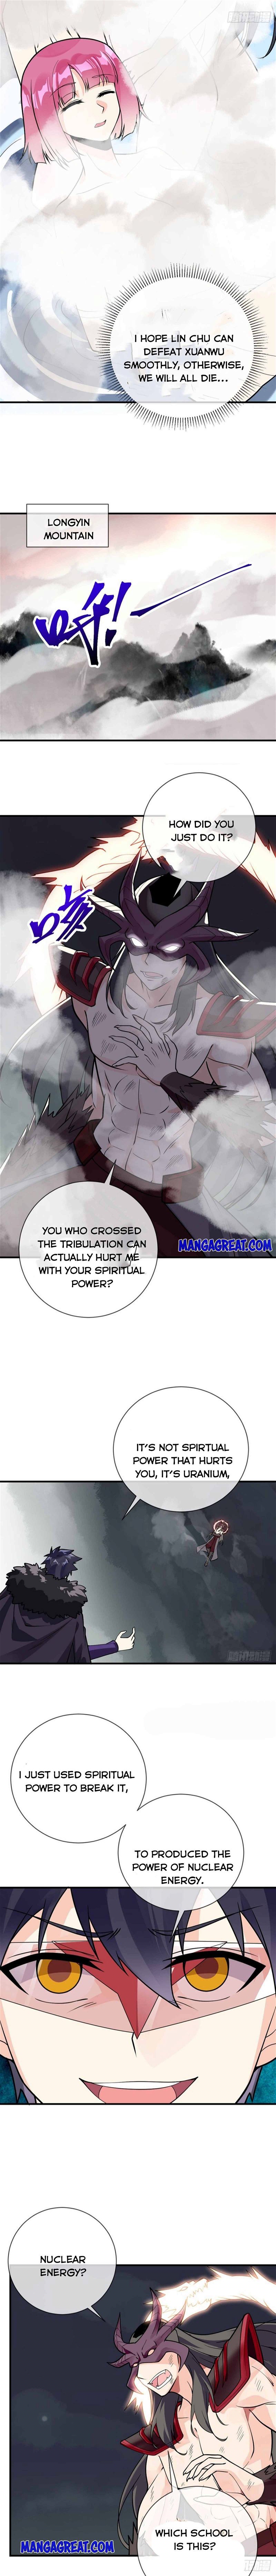 Extraordinary Son-In-Law Chapter 101 page 4